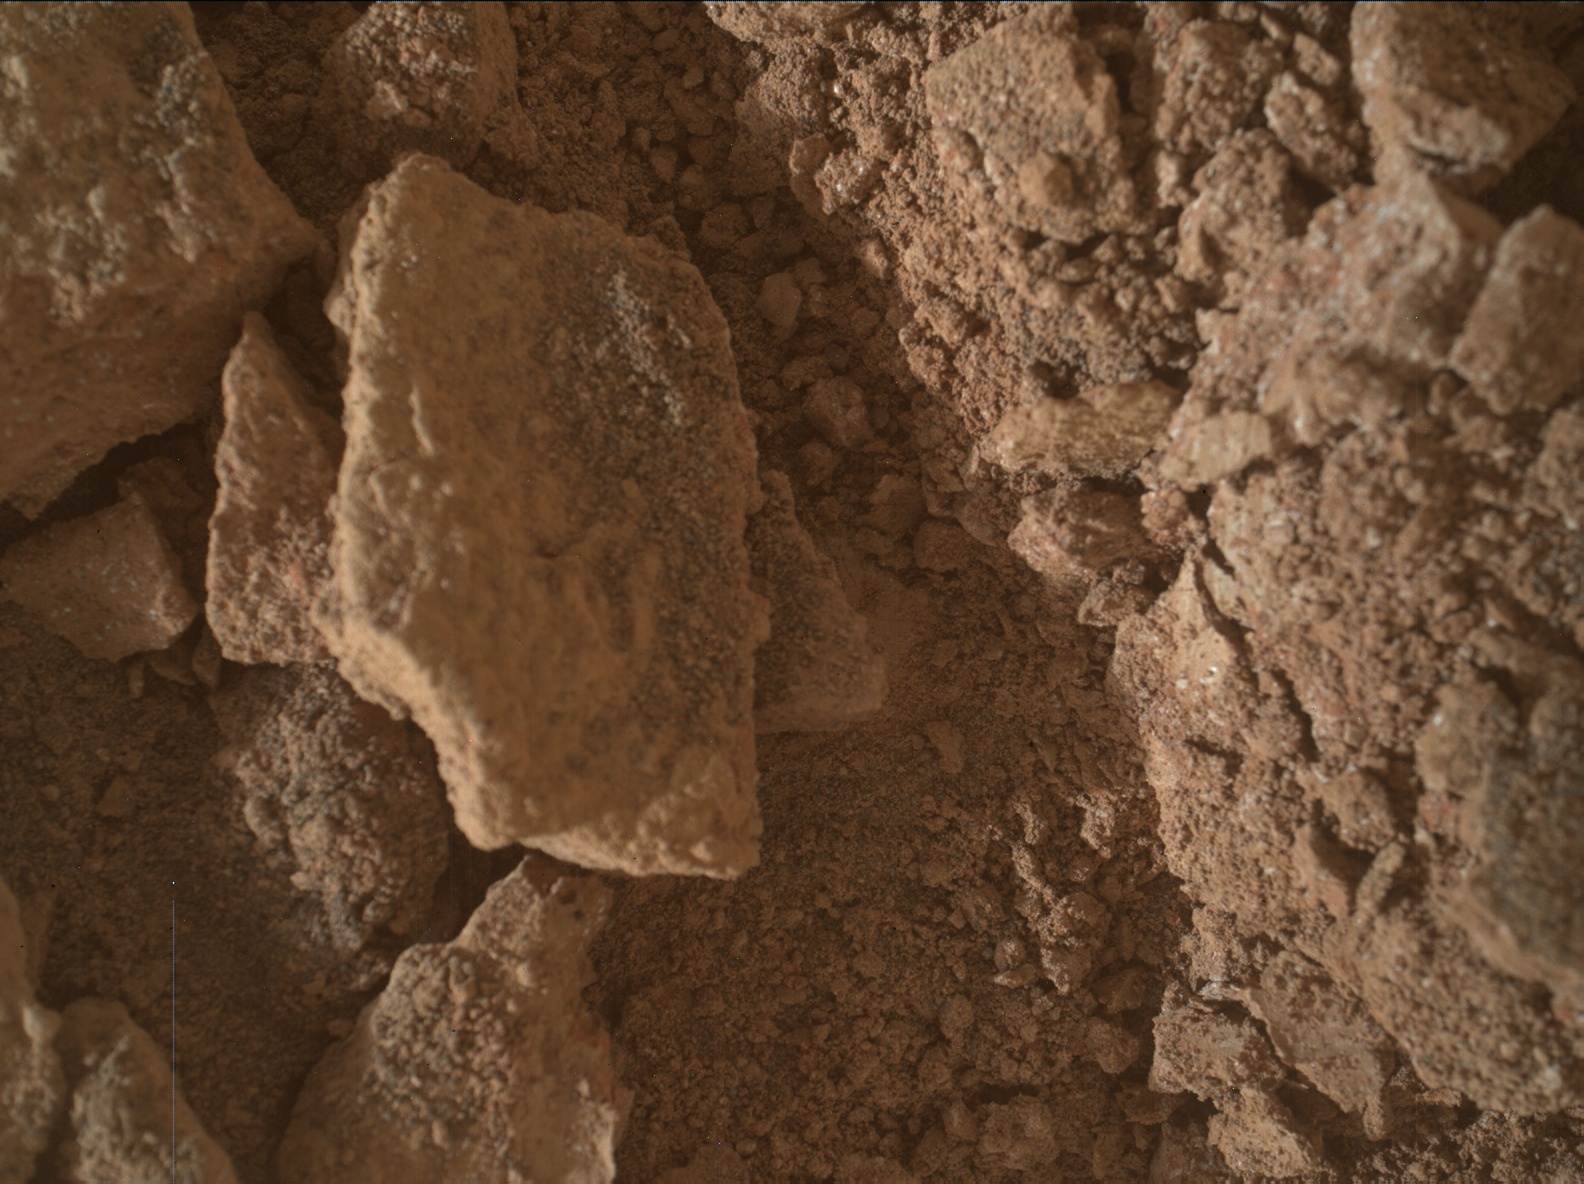 Nasa's Mars rover Curiosity acquired this image using its Mars Hand Lens Imager (MAHLI) on Sol 3371